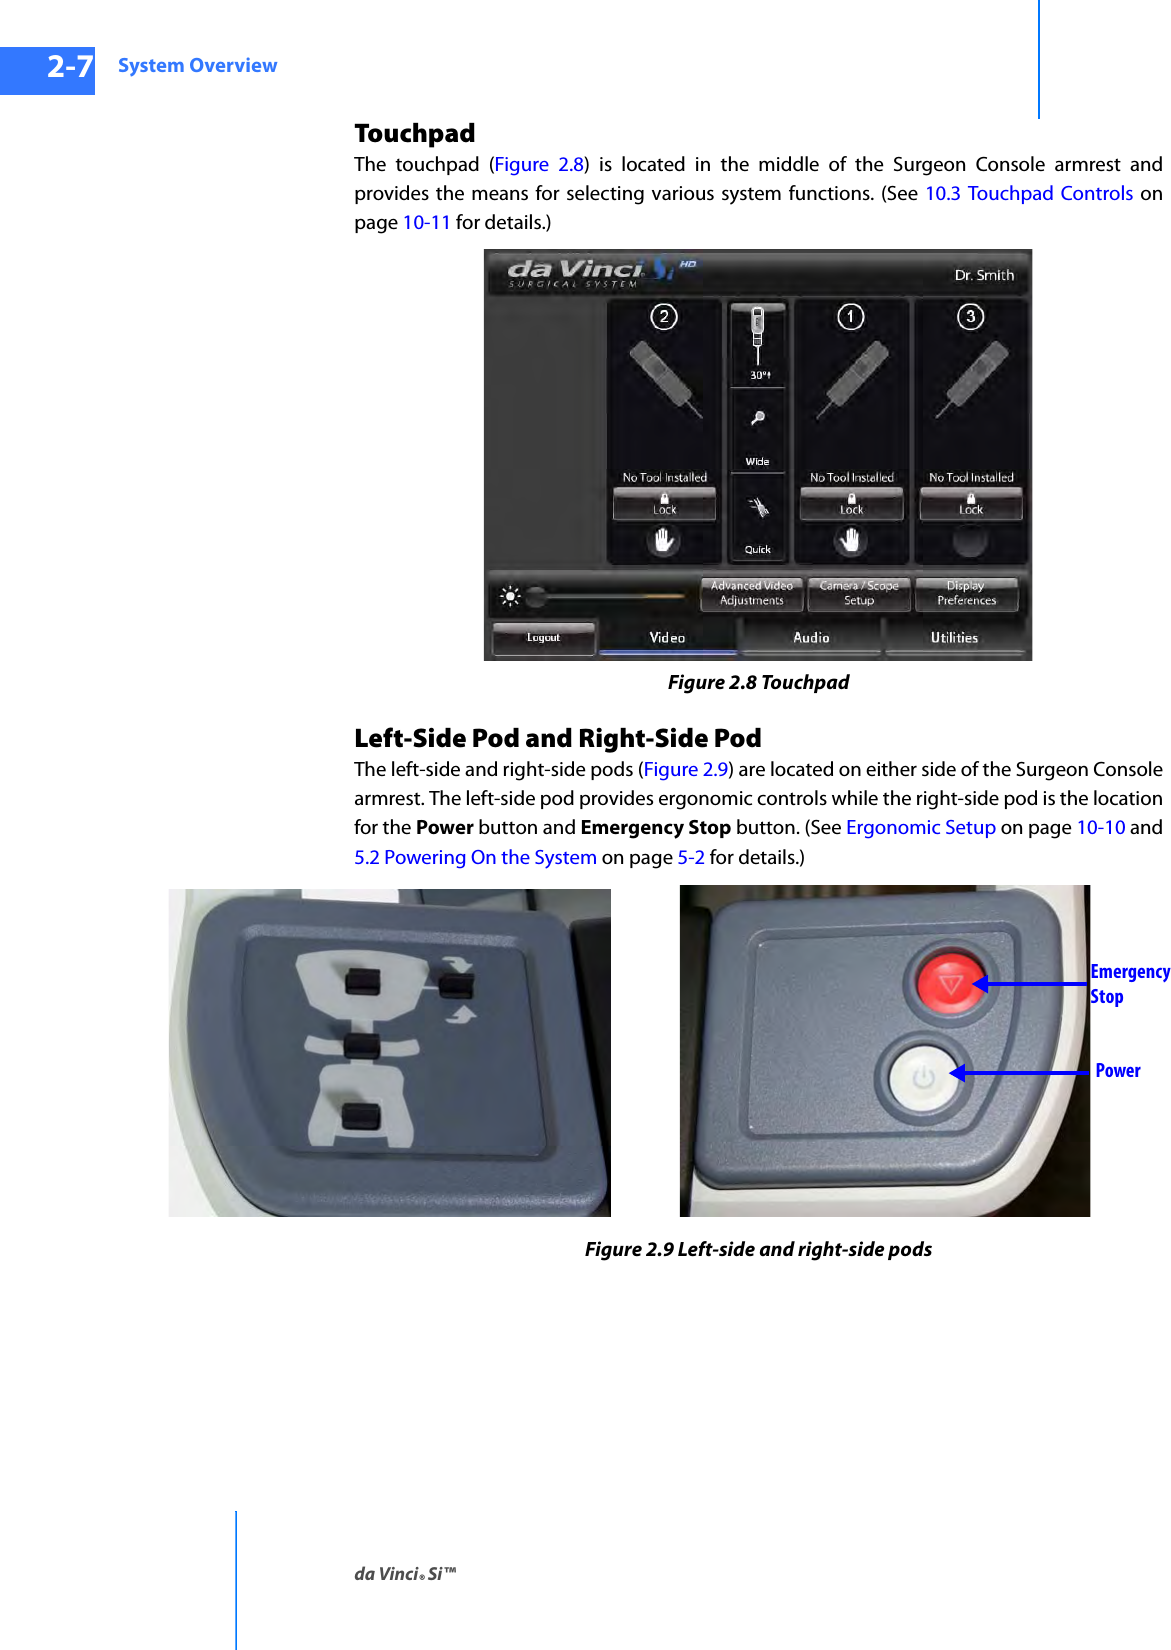 System Overviewda Vinci® Si™2-7DRAFT/PRE-RELEASE/CONFIDENTIAL10/9/14TouchpadThe touchpad (Figure 2.8) is located in the middle of the Surgeon Console armrest and provides the means for selecting various system functions. (See 10.3 Touchpad Controls on page 10-11 for details.)Figure 2.8 TouchpadLeft-Side Pod and Right-Side PodThe left-side and right-side pods (Figure 2.9) are located on either side of the Surgeon Console armrest. The left-side pod provides ergonomic controls while the right-side pod is the location for the Power button and Emergency Stop button. (See Ergonomic Setup on page 10-10 and 5.2 Powering On the System on page 5-2 for details.)Figure 2.9 Left-side and right-side podsEmergencyStopPower